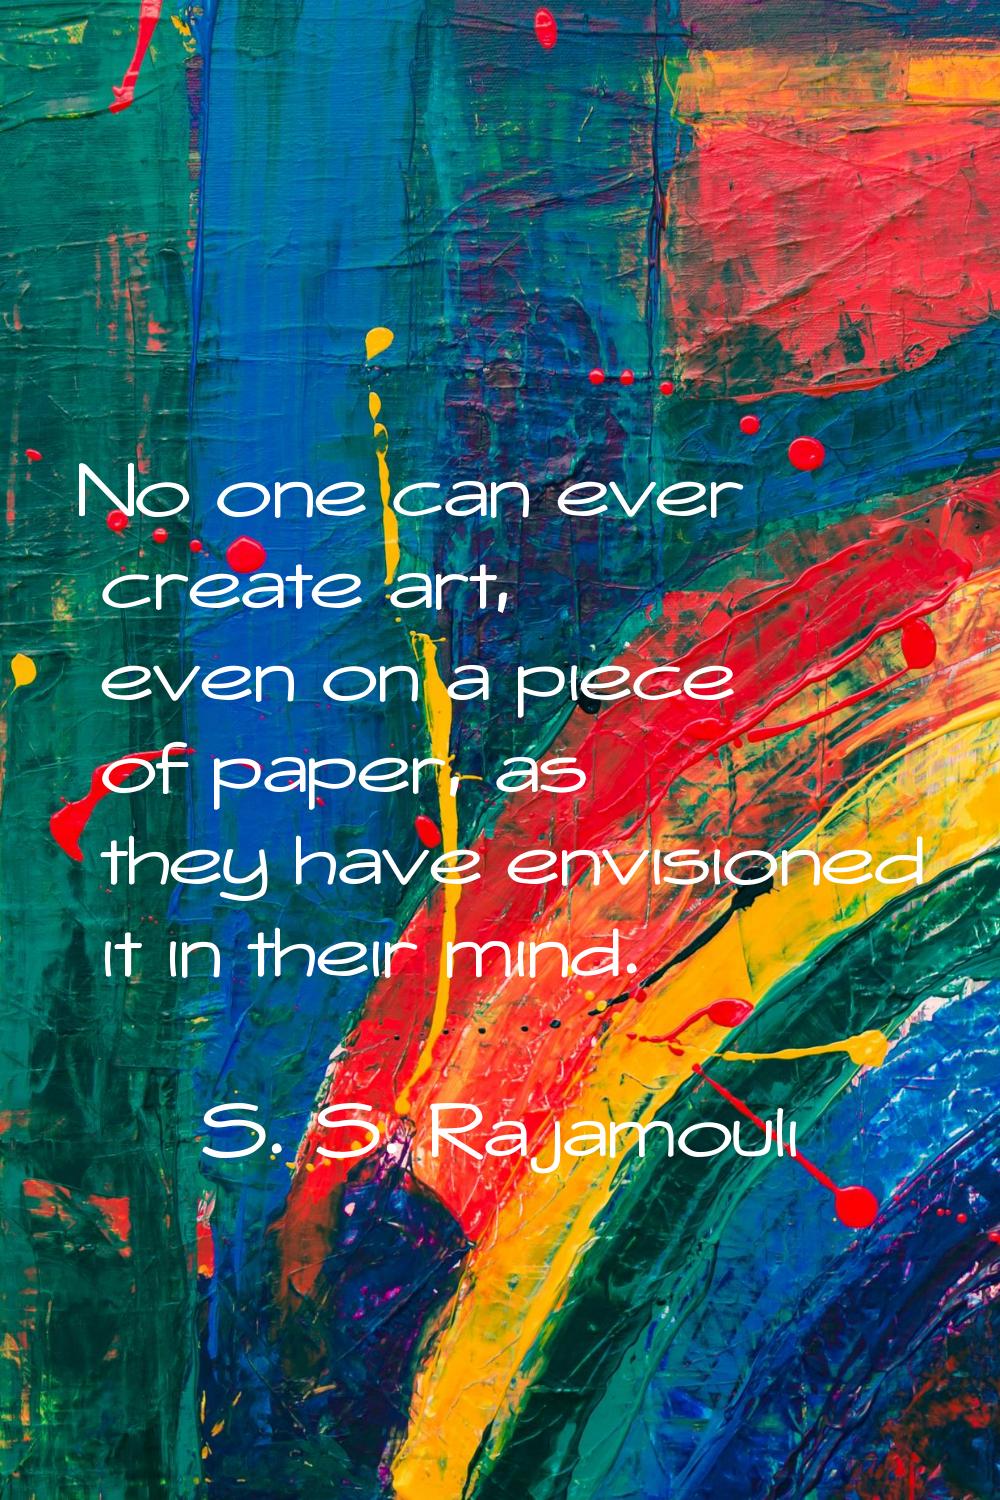 No one can ever create art, even on a piece of paper, as they have envisioned it in their mind.